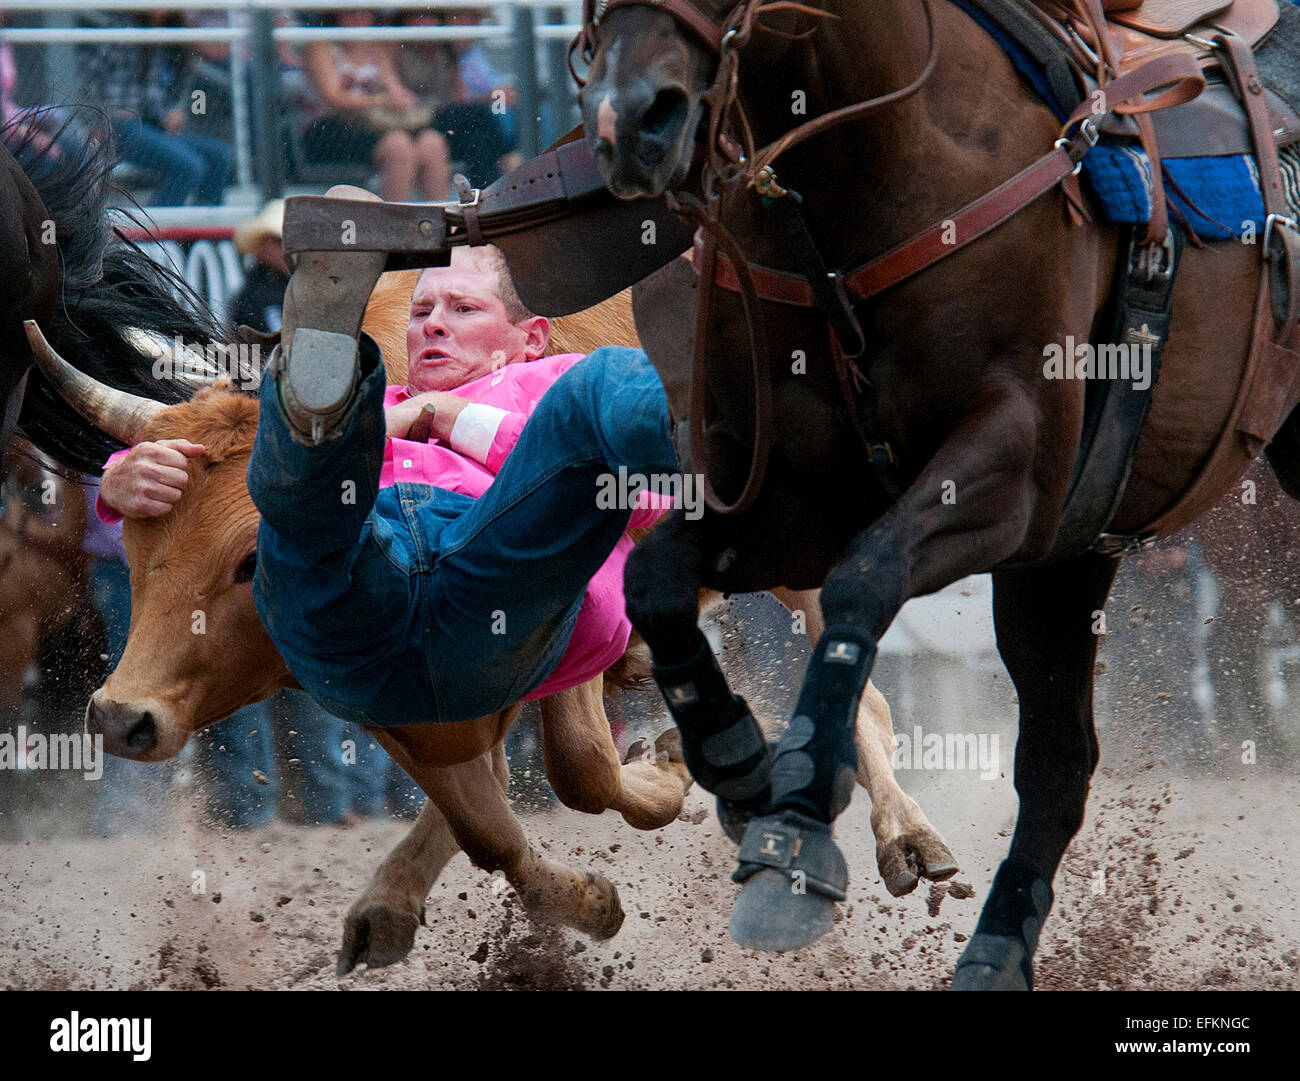 A cowboy grabs the steer by the horns during the Rodeo steer wrestling event on the opening day of 117th annual Cheyenne Frontier Days July 25, 2013 in Cheyenne, Wyoming. Stock Photo